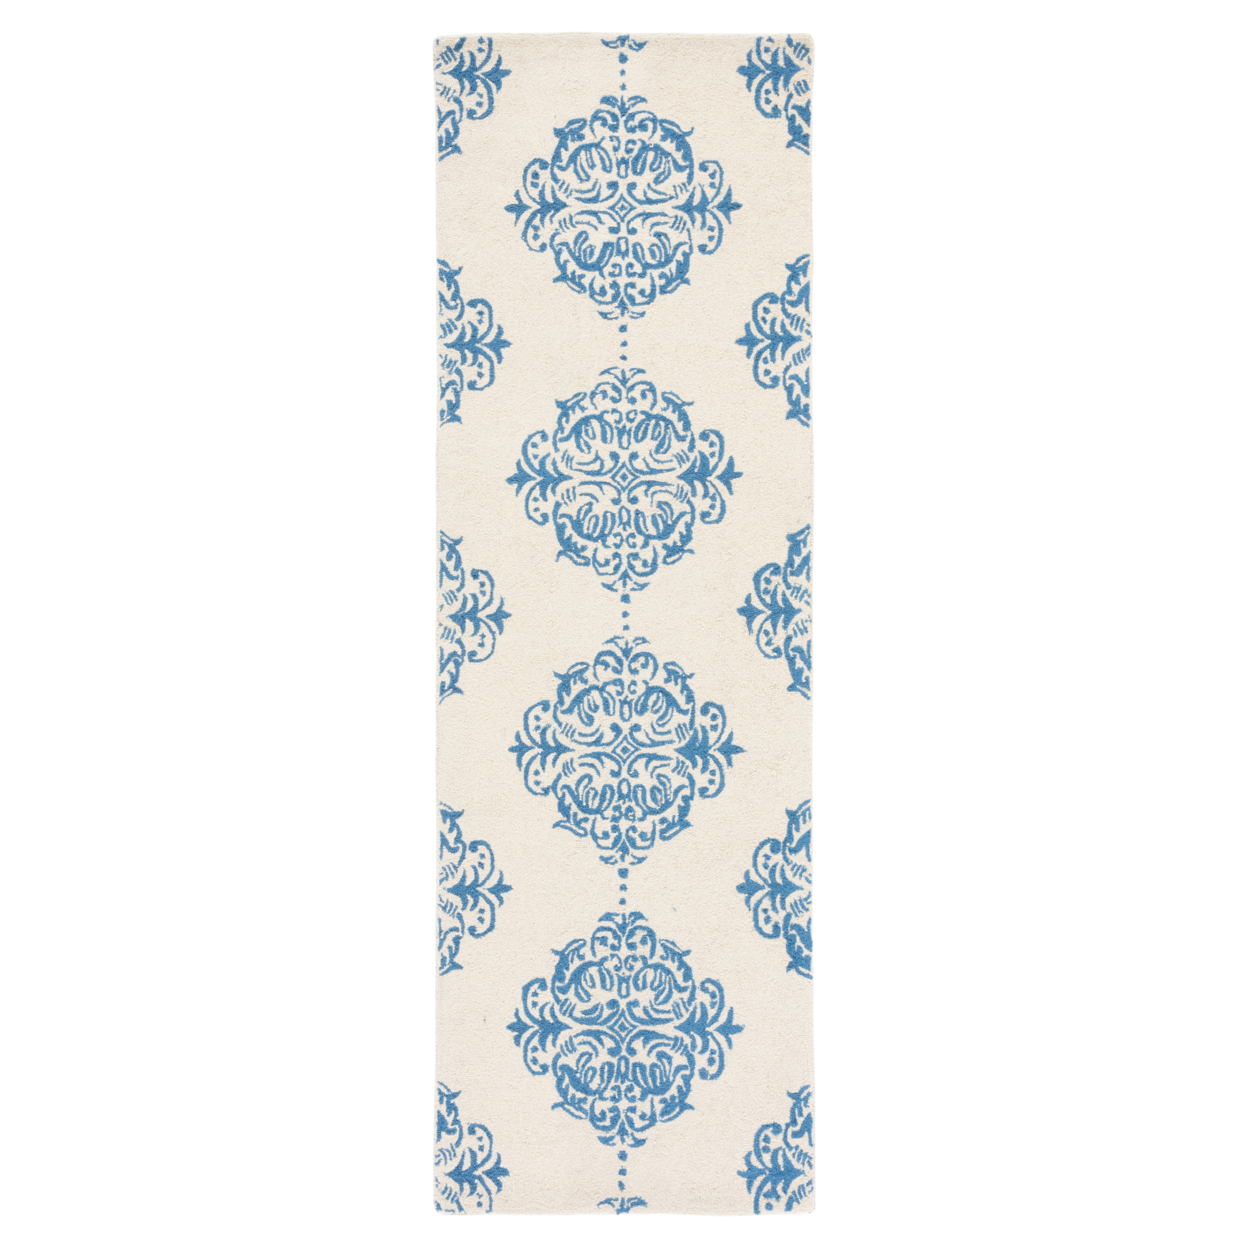 SAFAVIEH Chelsea HK145A Hand-hooked Ivory / Blue Rug - 2' 6 X 4'